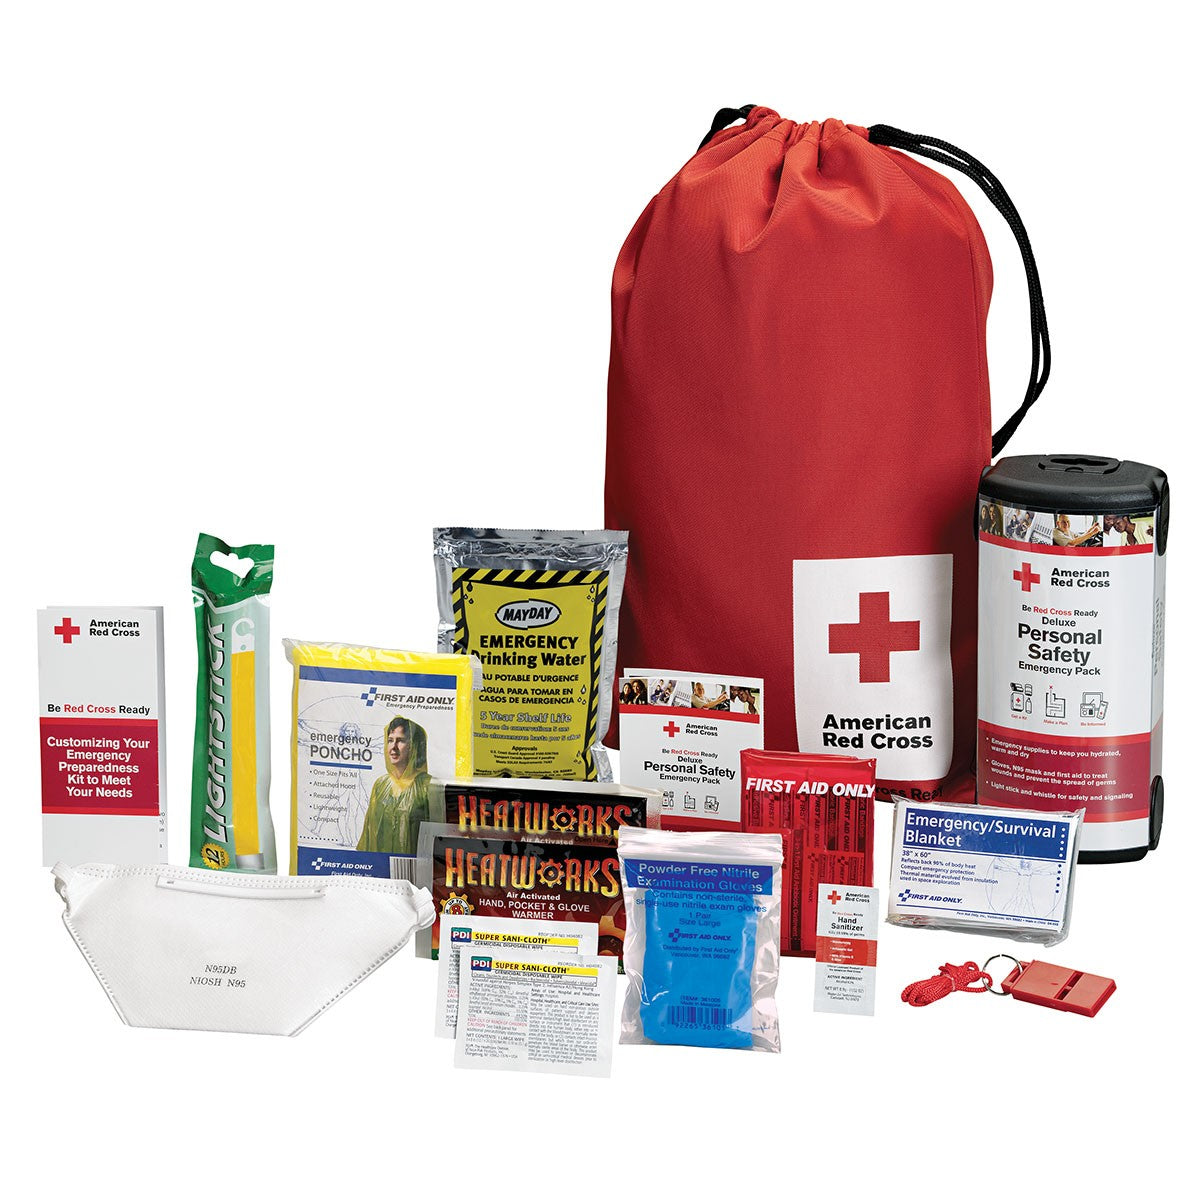 American Red Cross Deluxe Personal Safety Emergency Pack - W-RC-622